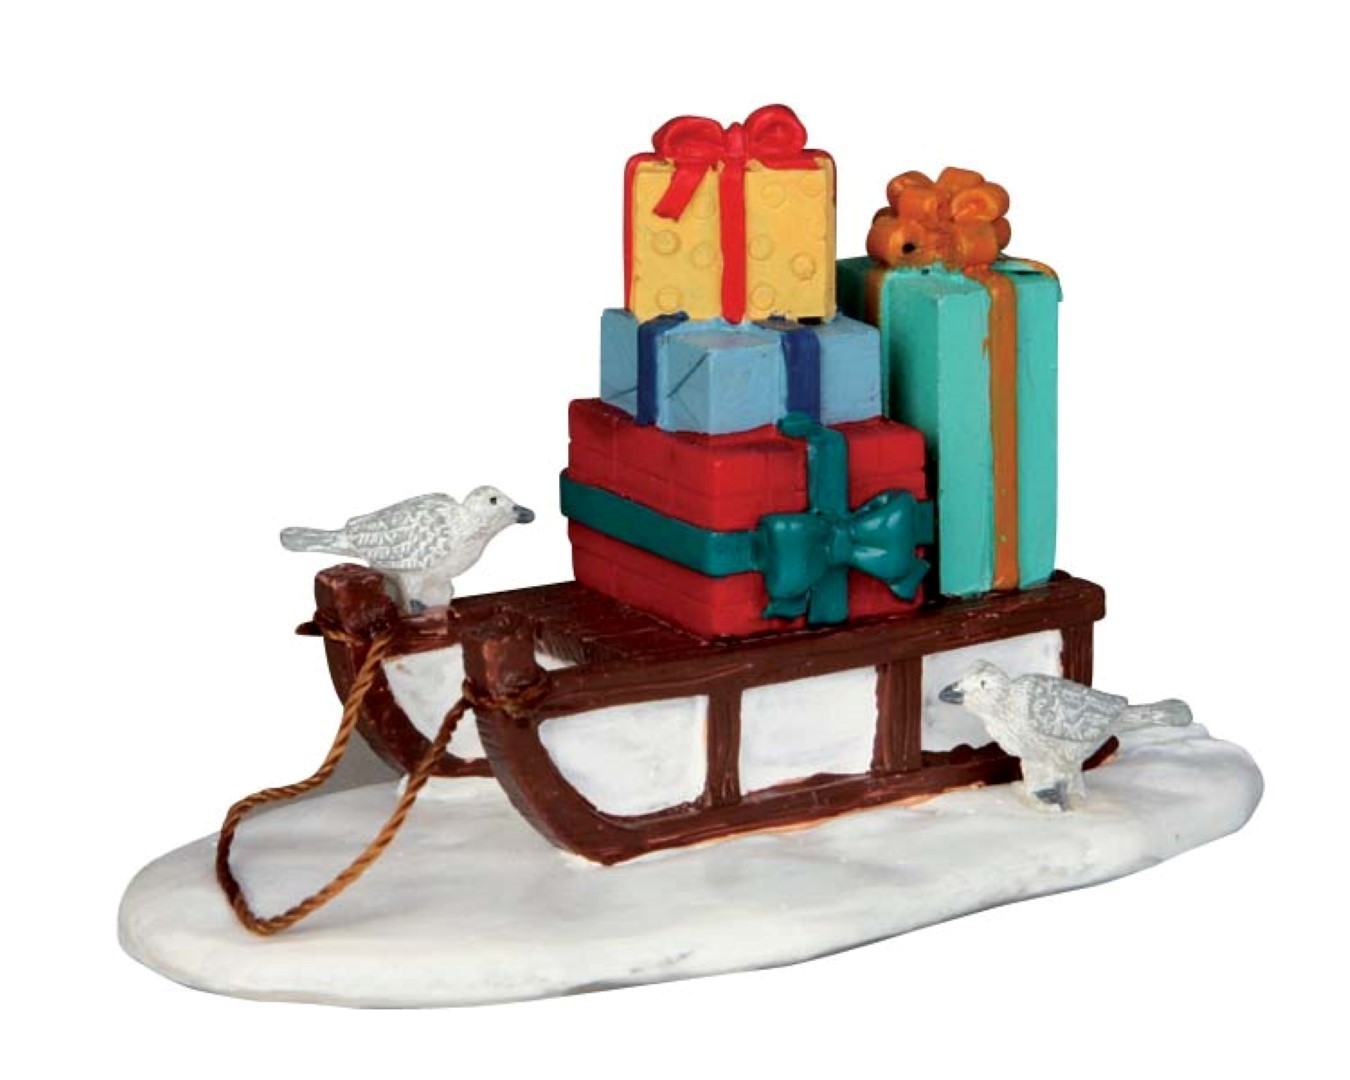 LEMAX Sled with presents - 